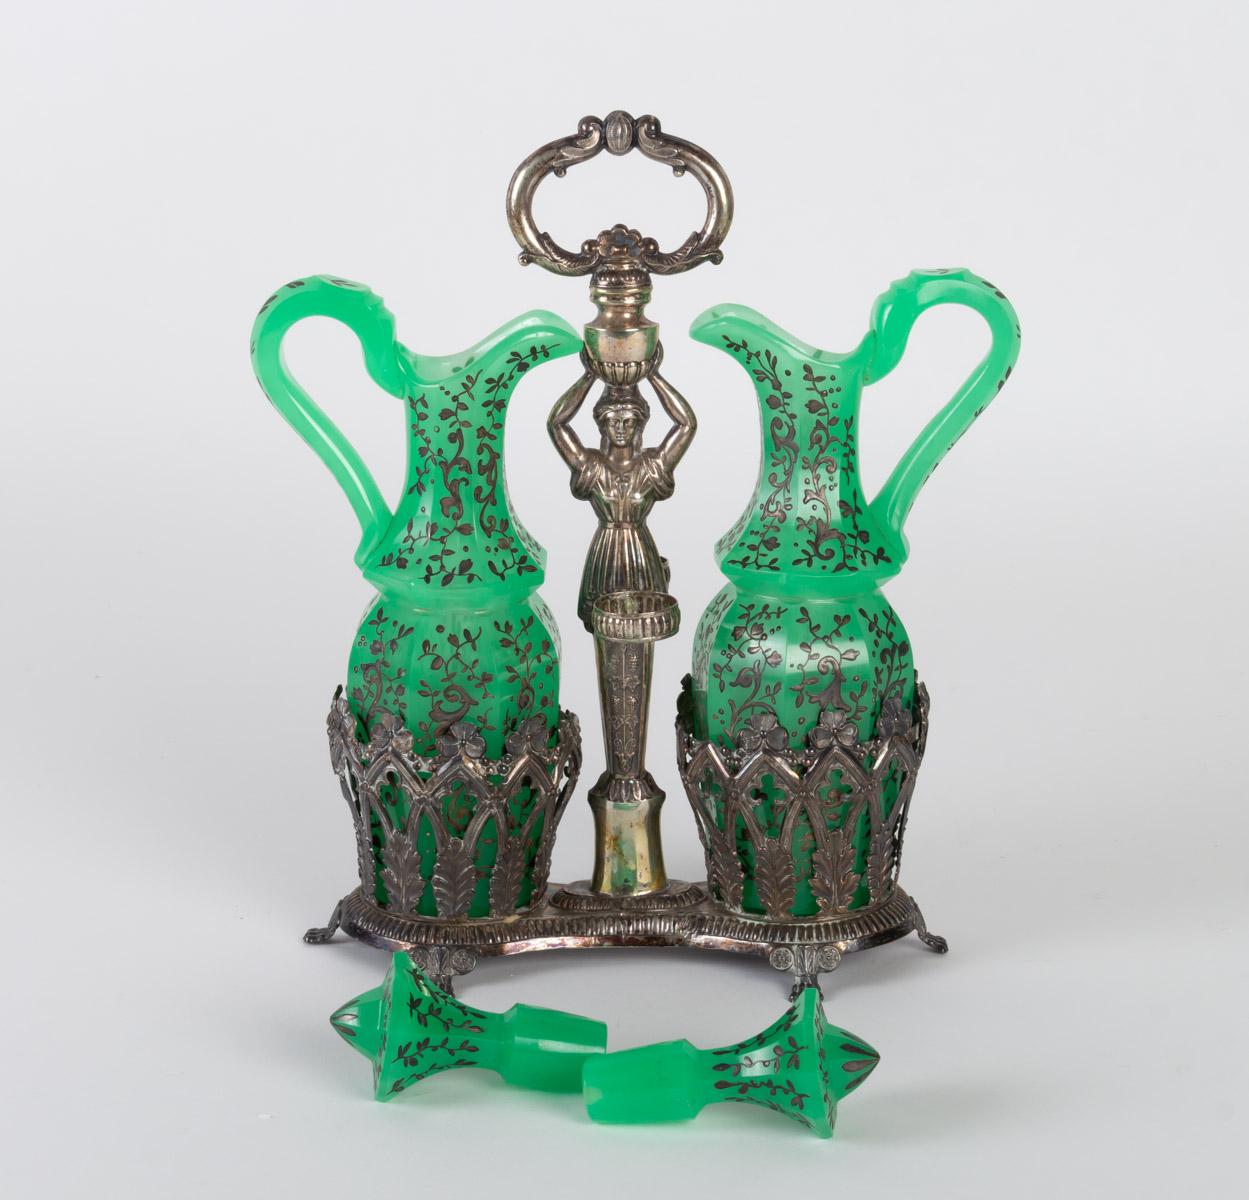 19th Century Oil and Vinegar in Green Opaline and Enameled Gold in Its Silver Support